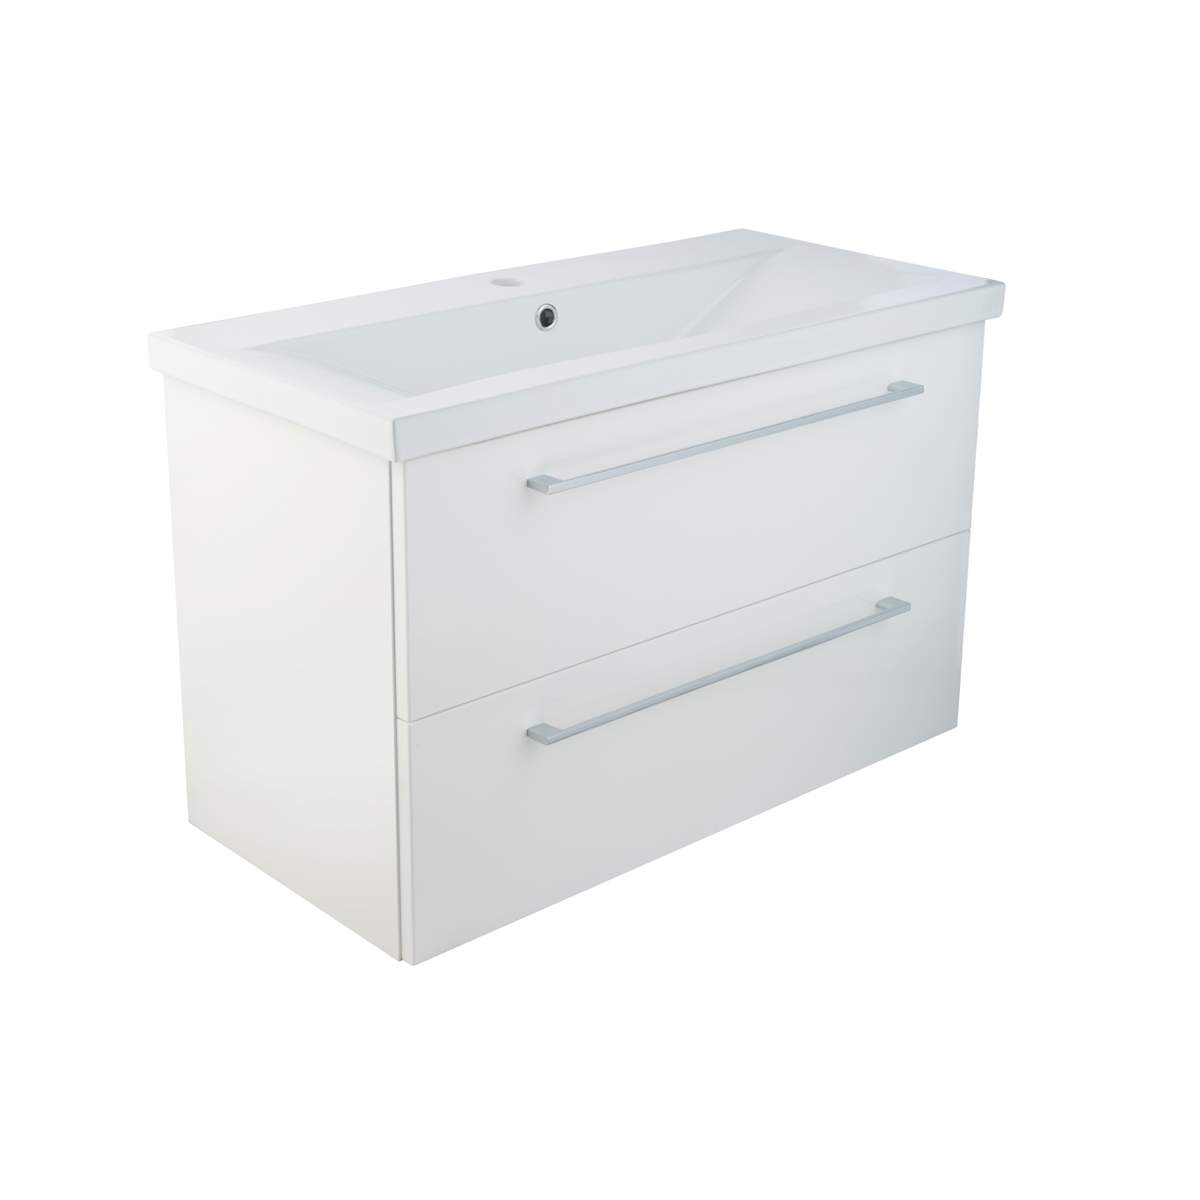 JTP Pace Units Medium Projection 800 Wall Mounted Unit with Drawers and Basin in White (PWM807W + MP800BS)